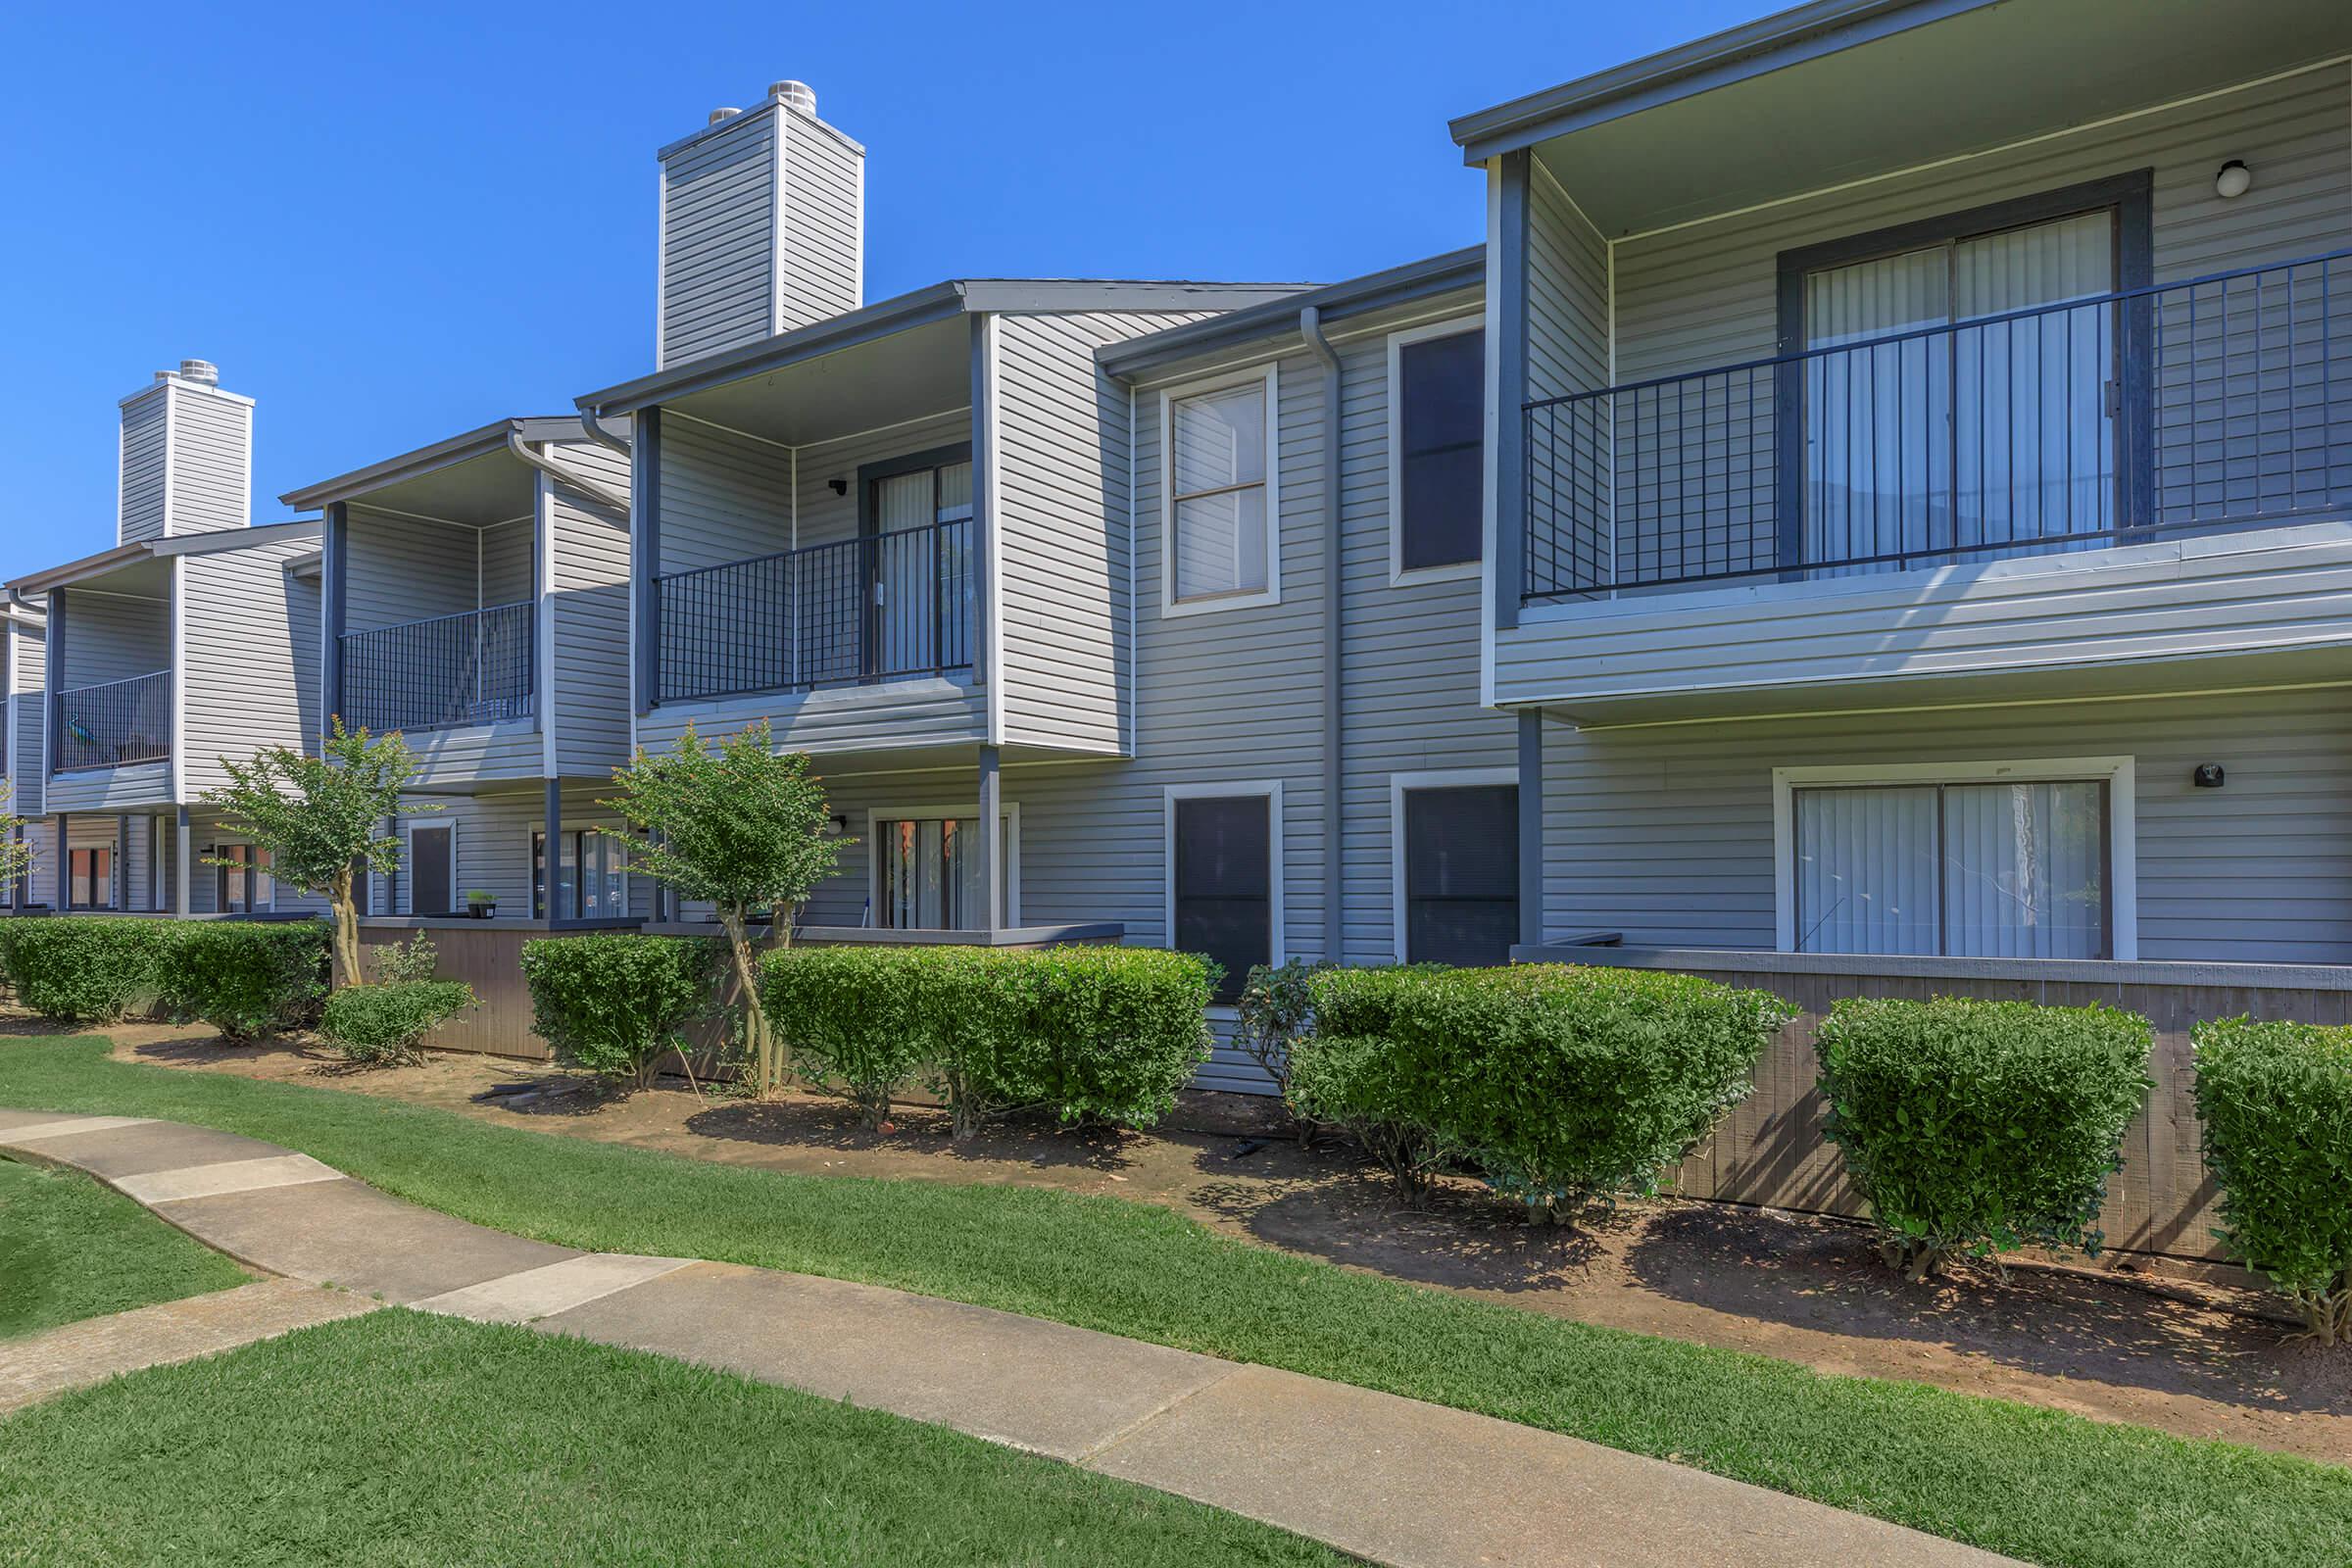 APARTMENTS FOR RENT IN LAKE JACKSON, TX